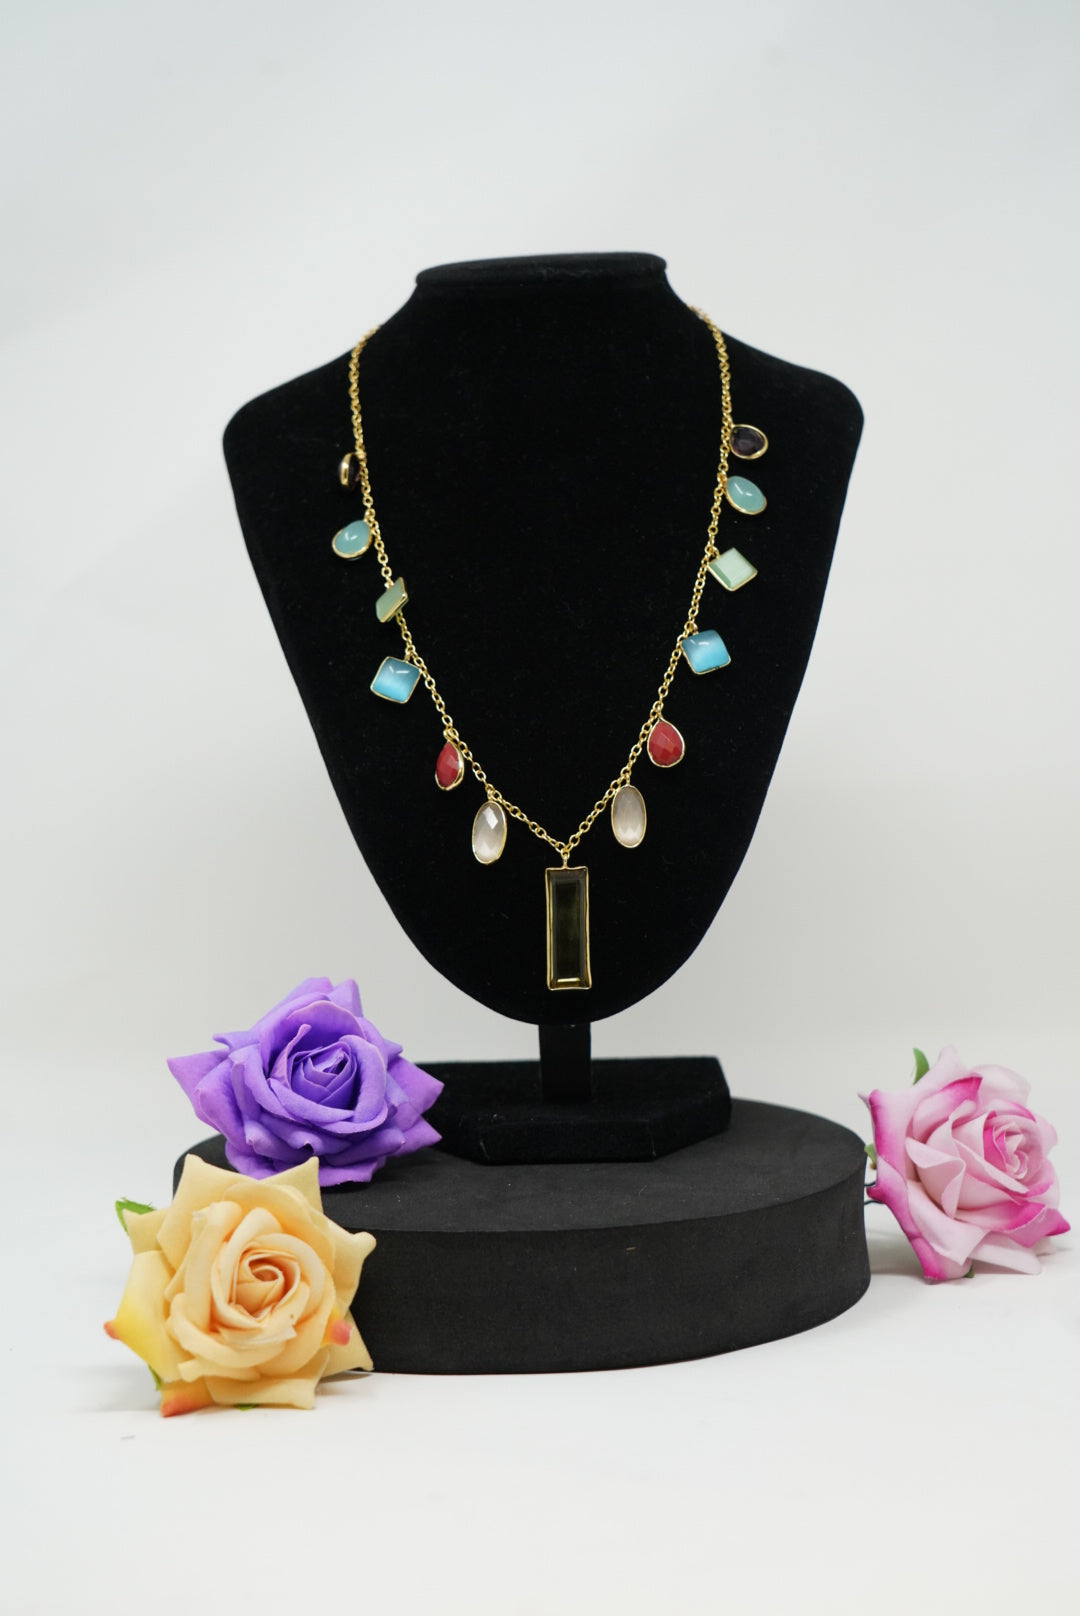 Gold Tone Multi Color Charm Necklace for Women